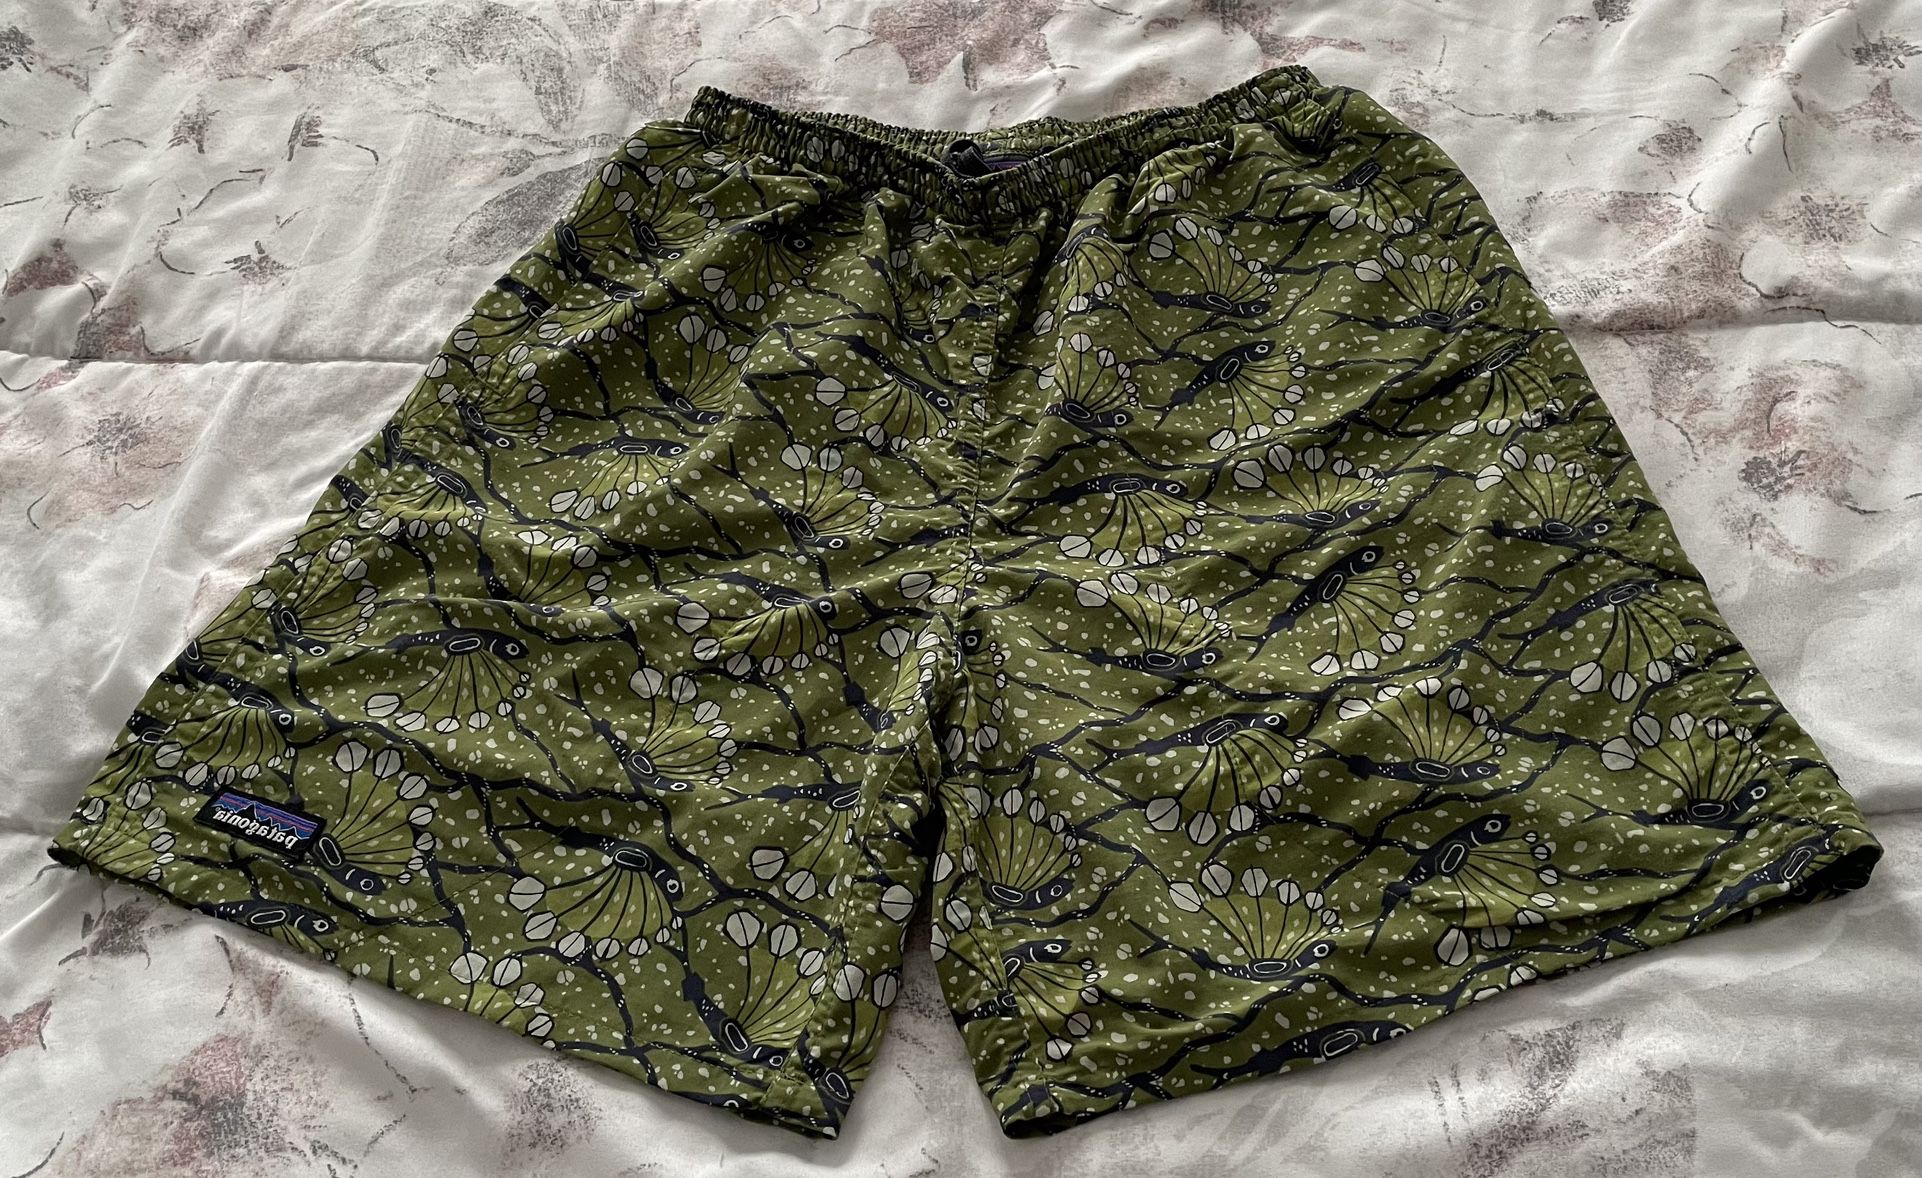 Patagonia Men’s Green Novelty Fish Swim Trunks Board Shorts with Pockets, size S